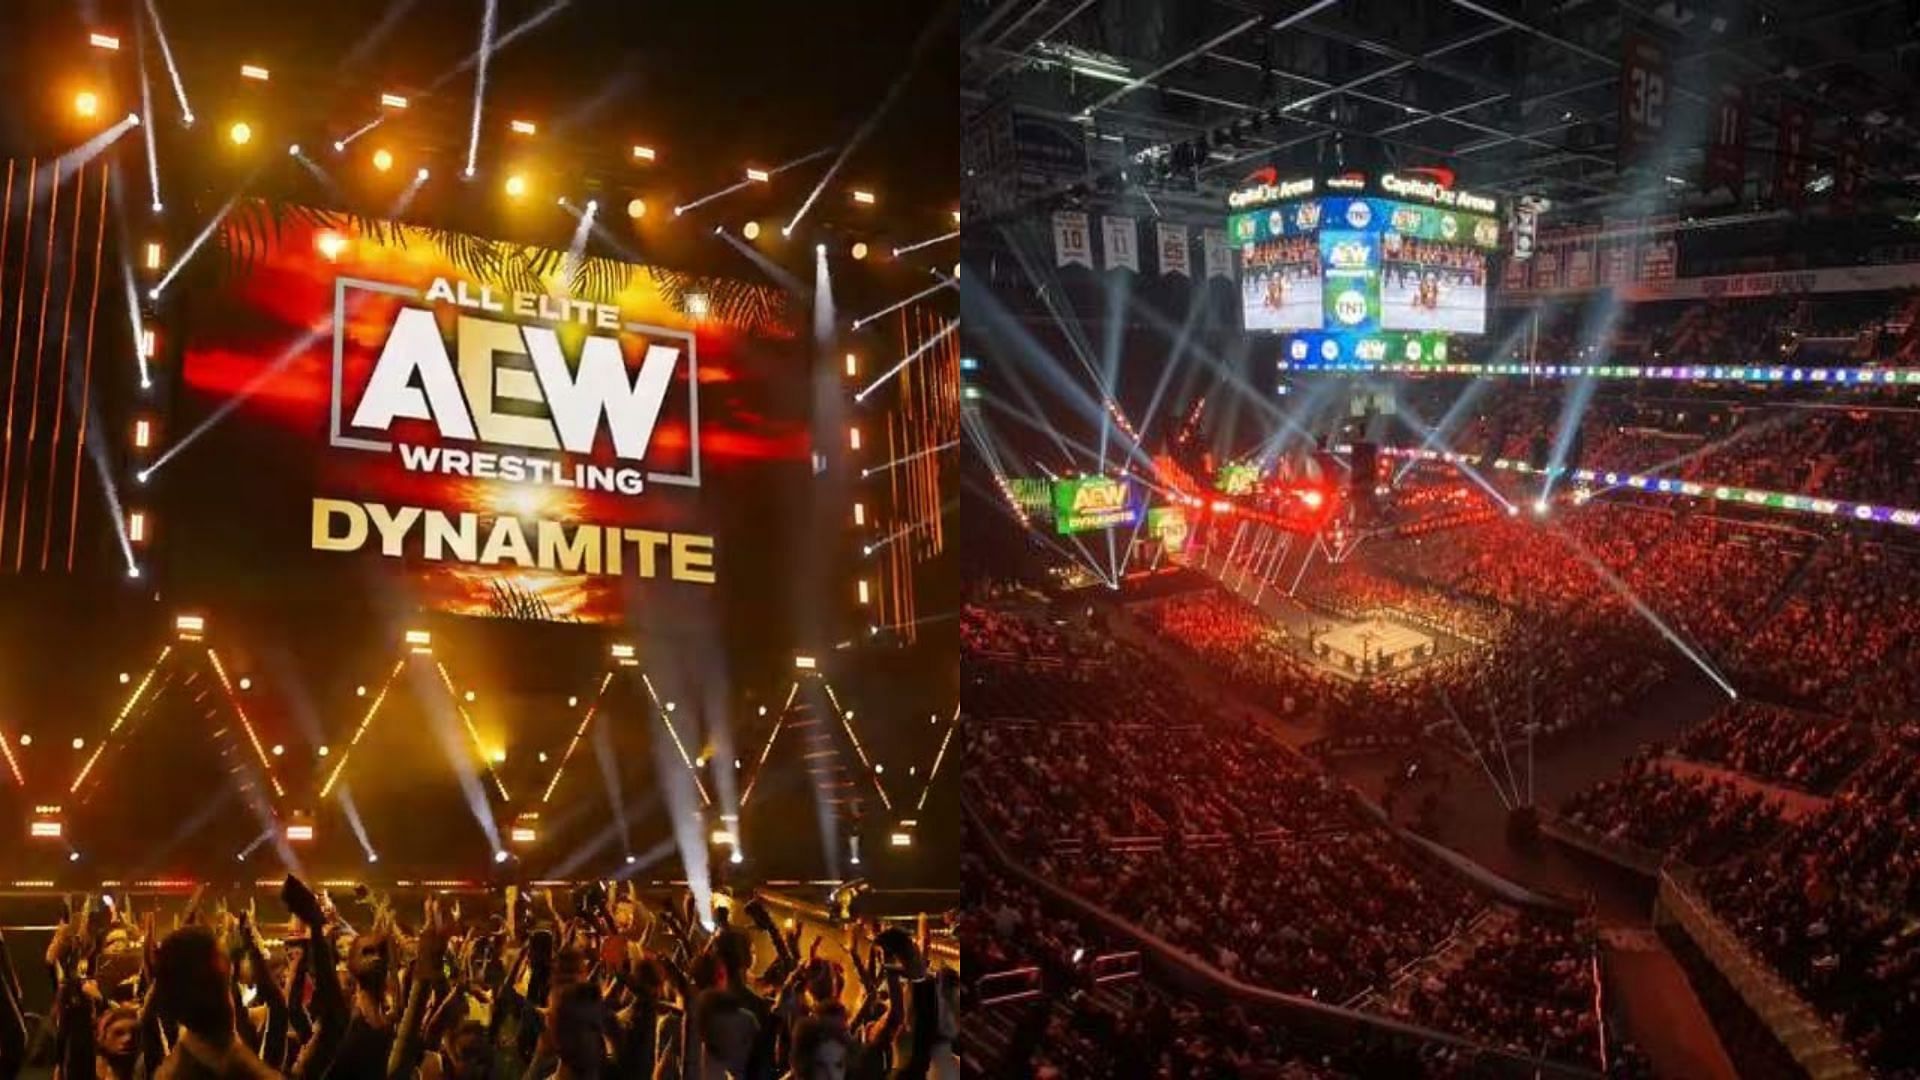 A returning AEW star picked up their first win after injury